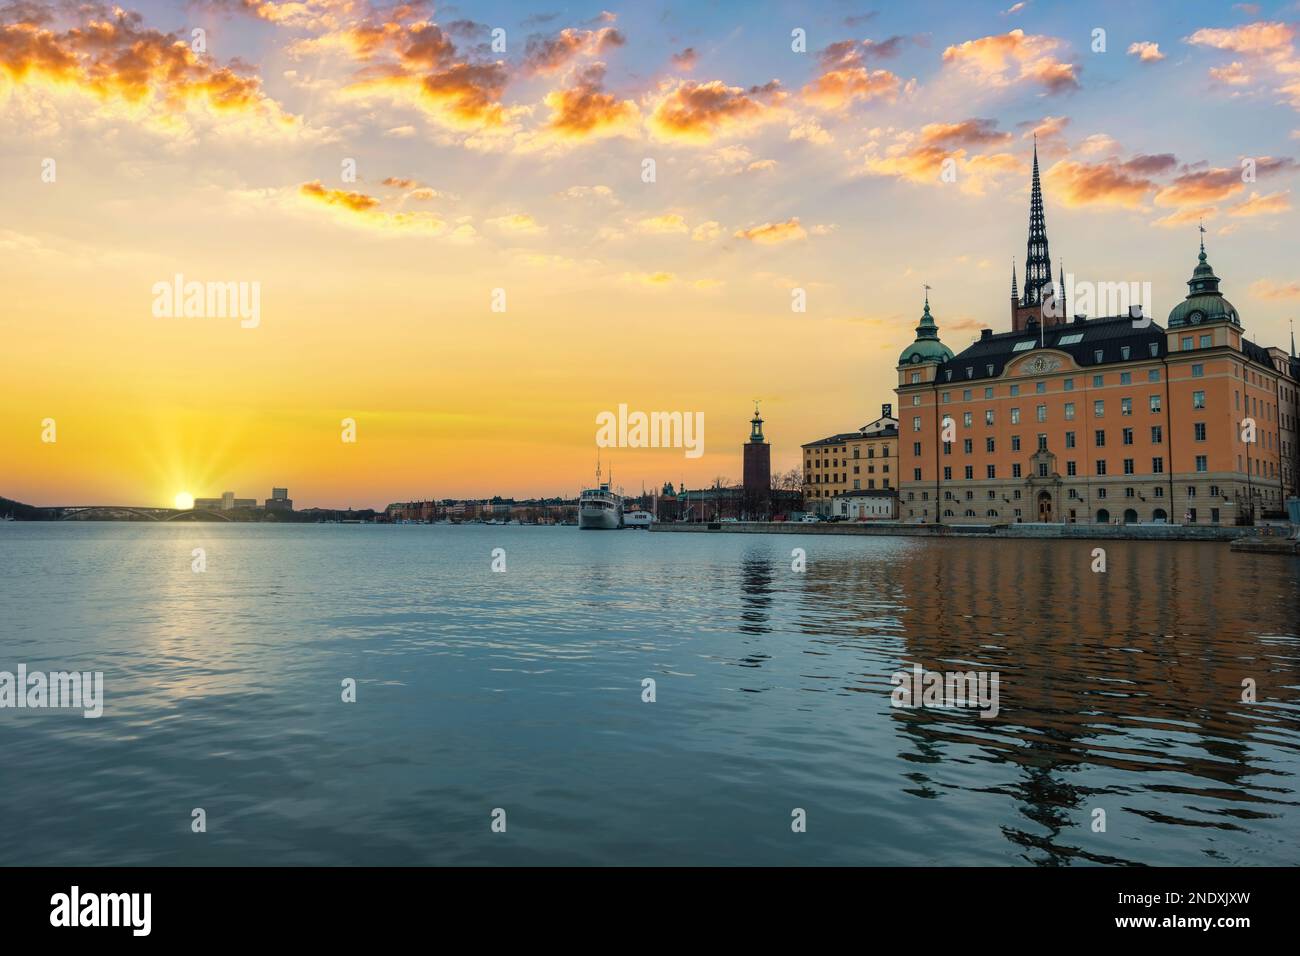 Stockholm Sweden, sunset city skyline at Stockholm City Hall and Gamla Stan Stock Photo